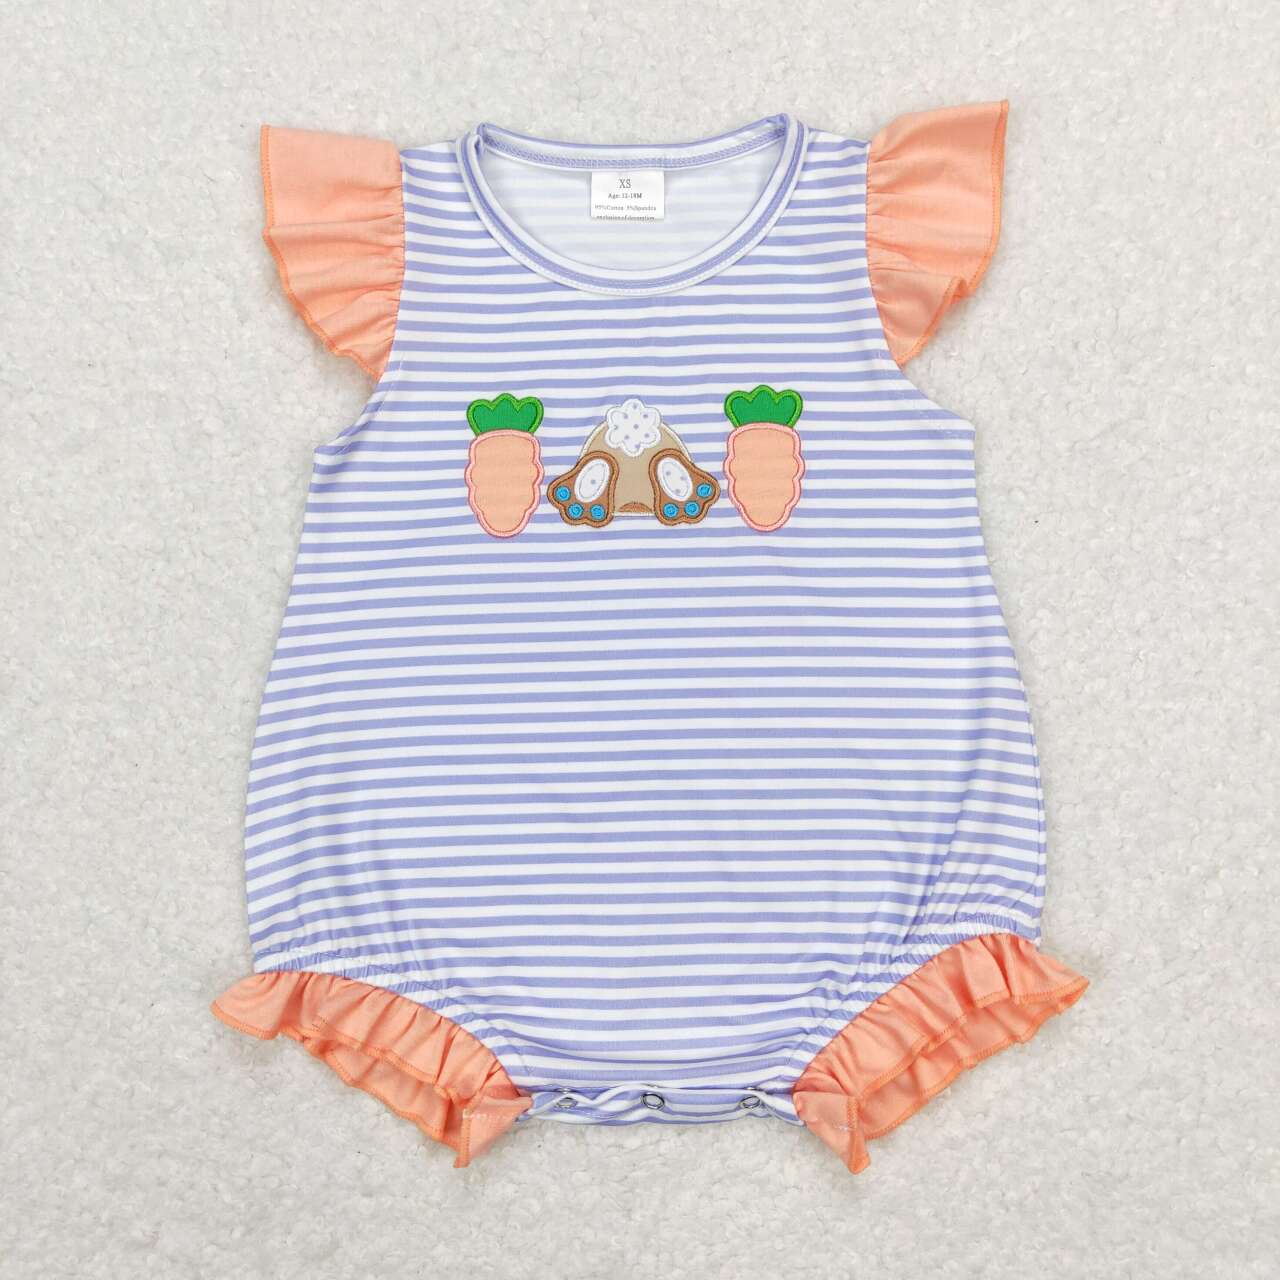 Embroidered Easter Carrot Rabbit Blue and White Striped Short Sleeve Orange Shorts Set Combination